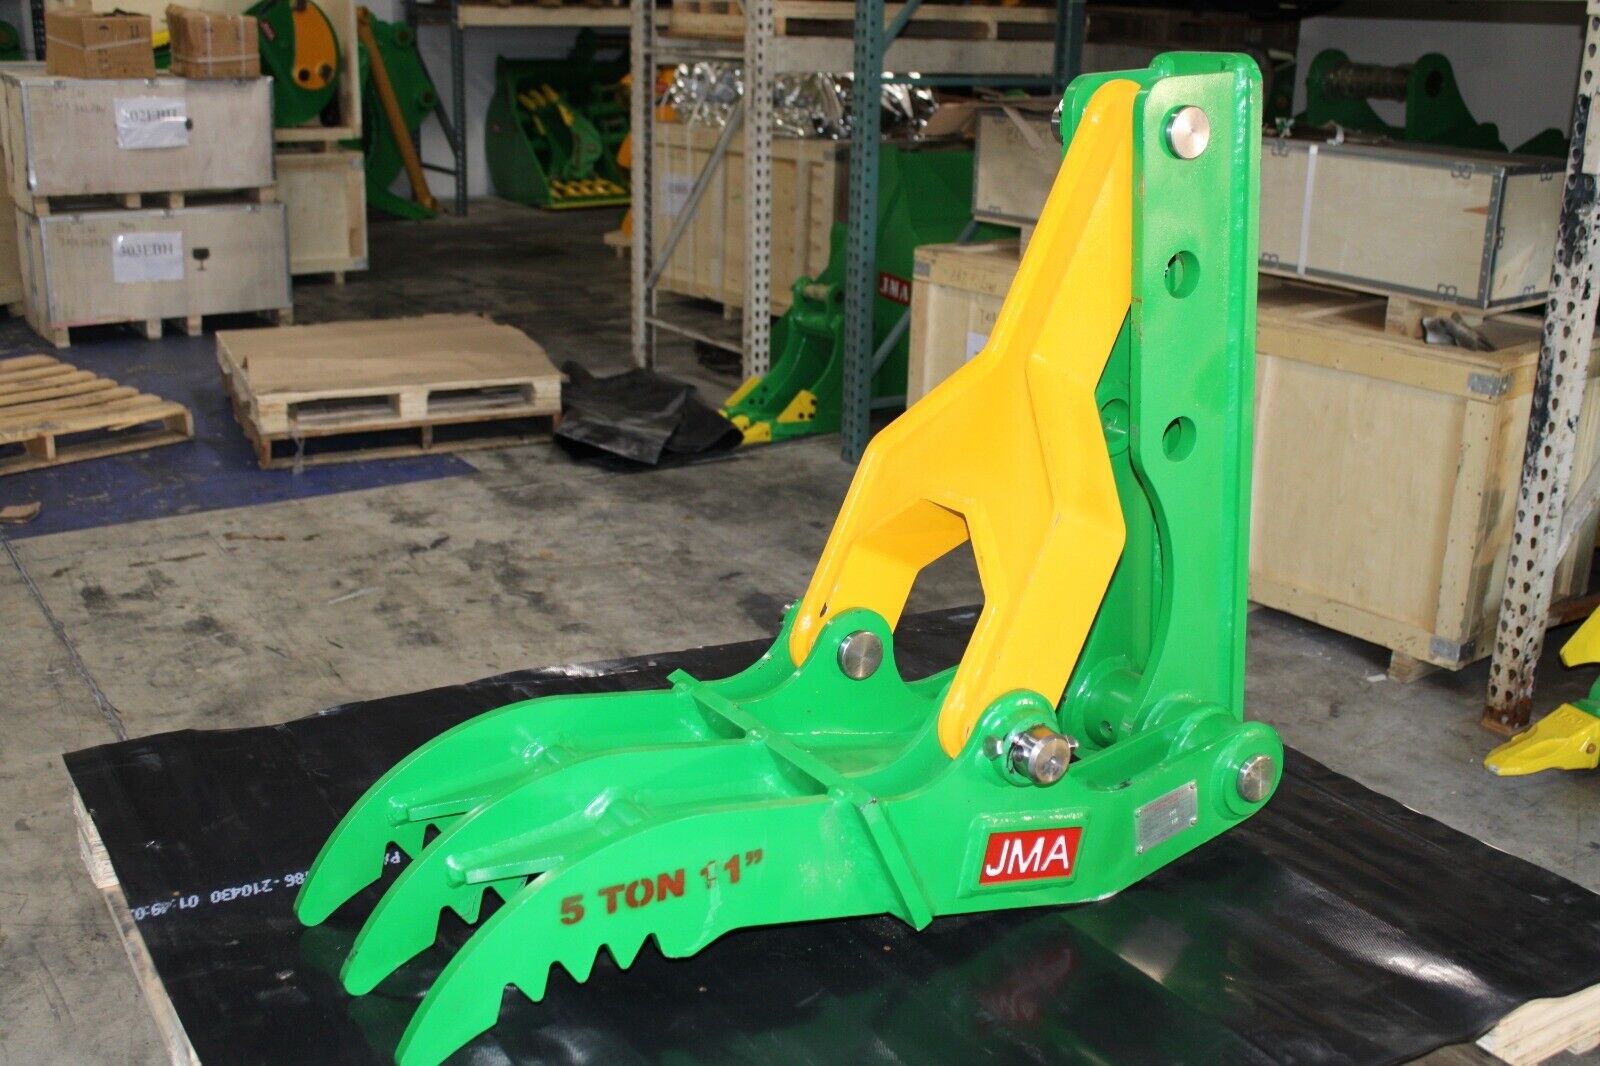 Jma Weld-on Manual Thumb, Fits All Machine That Weight 3 To 6 Tons Caterpillar